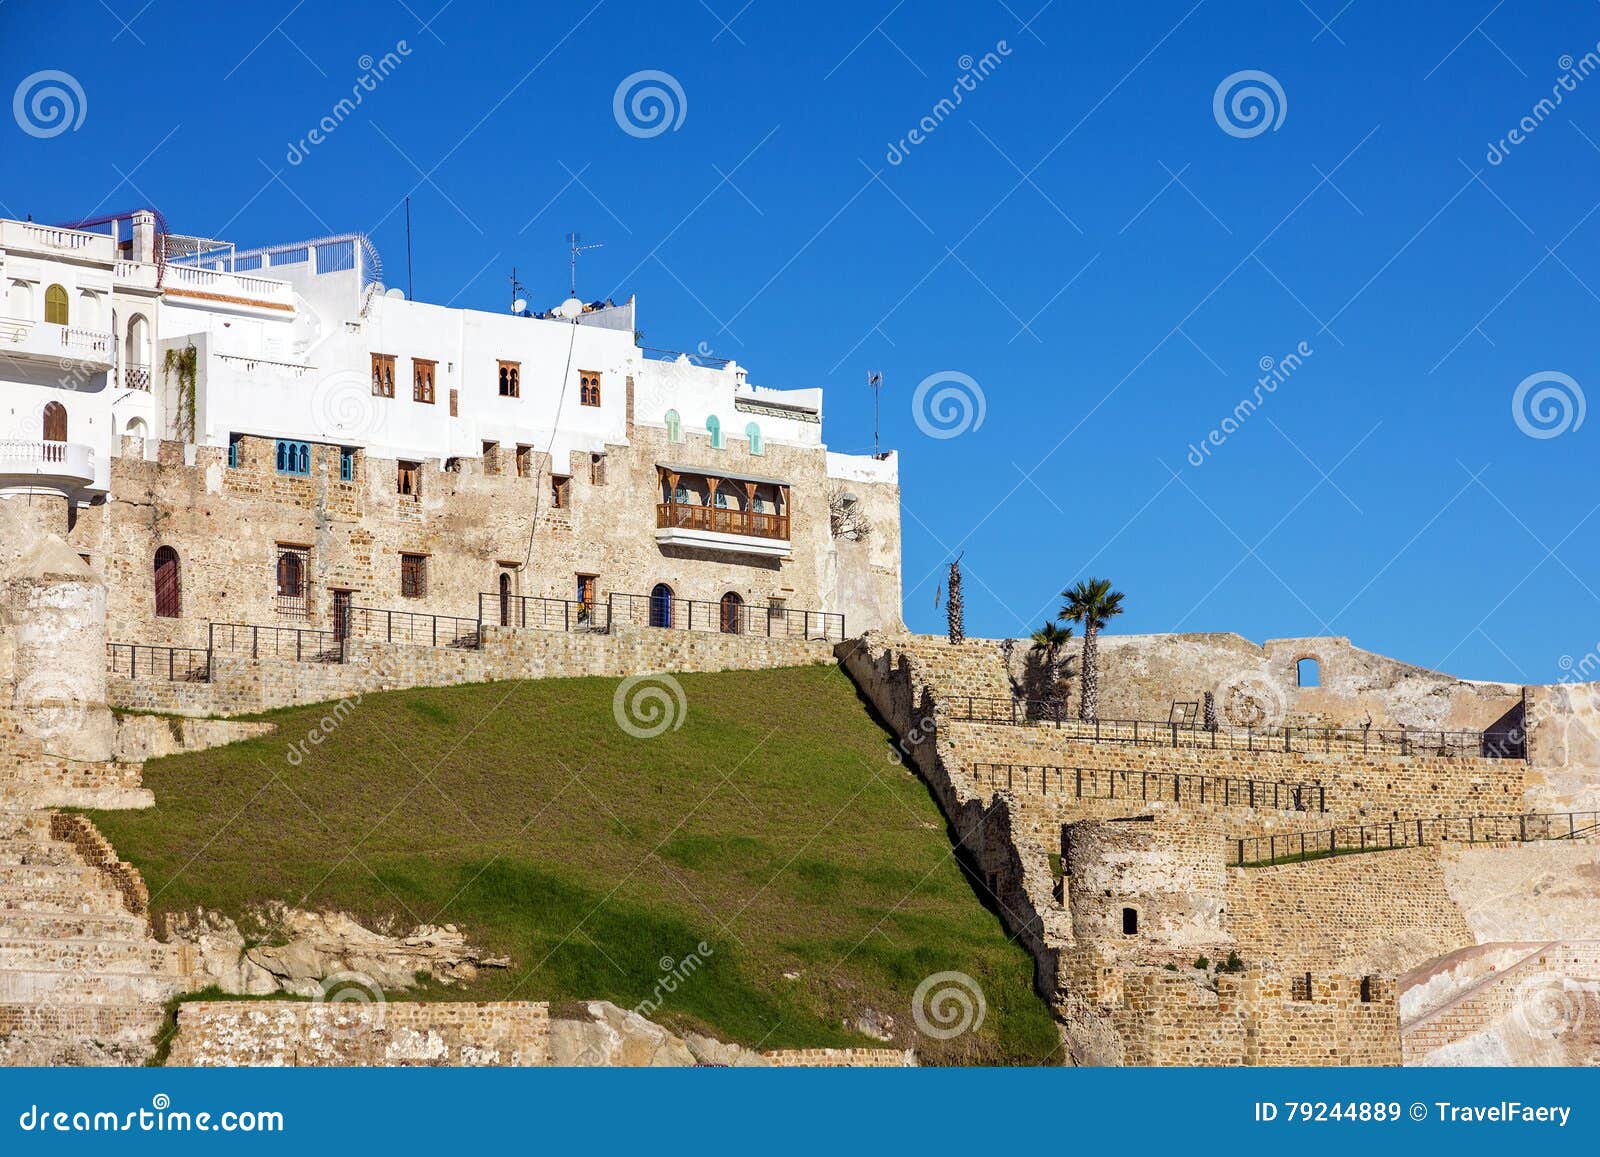 morocco, tanger, medina, ancient fortress in old town.